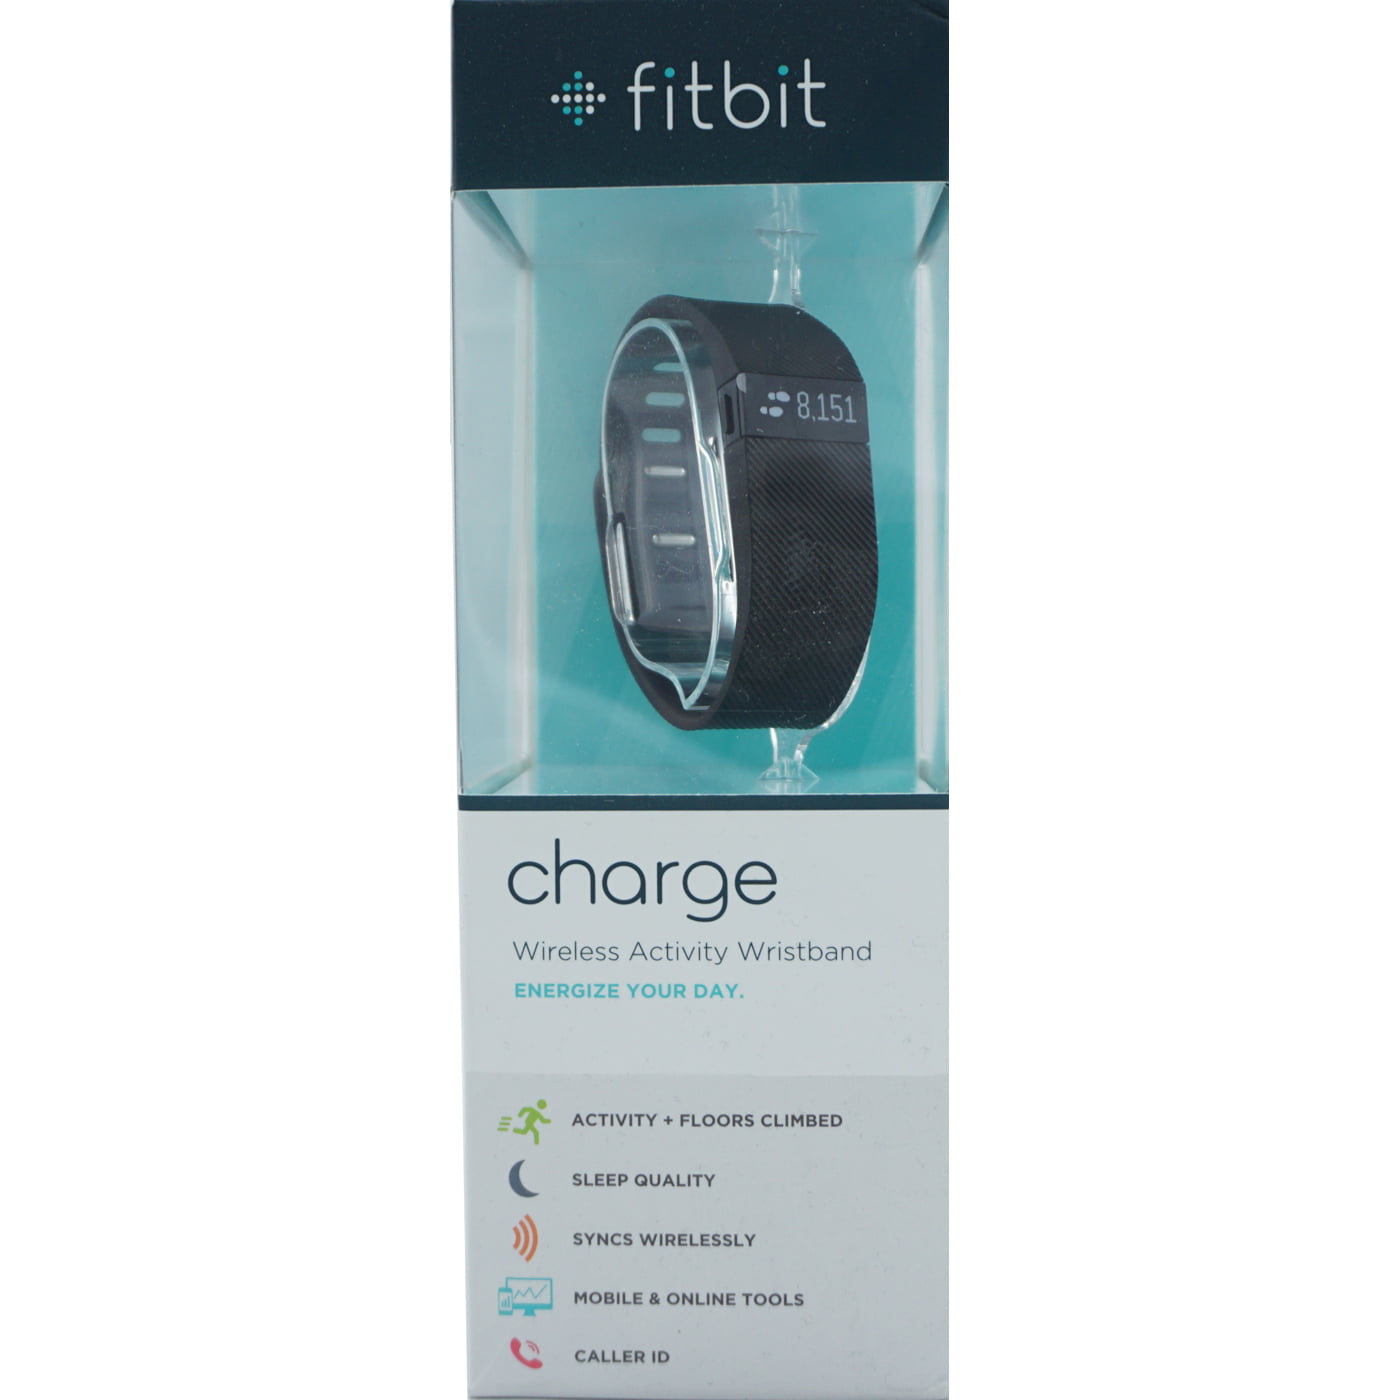 FREE SHIPPING Fitbit Charge Large L BLACK Sleep Activity Monitor with CHARGER 